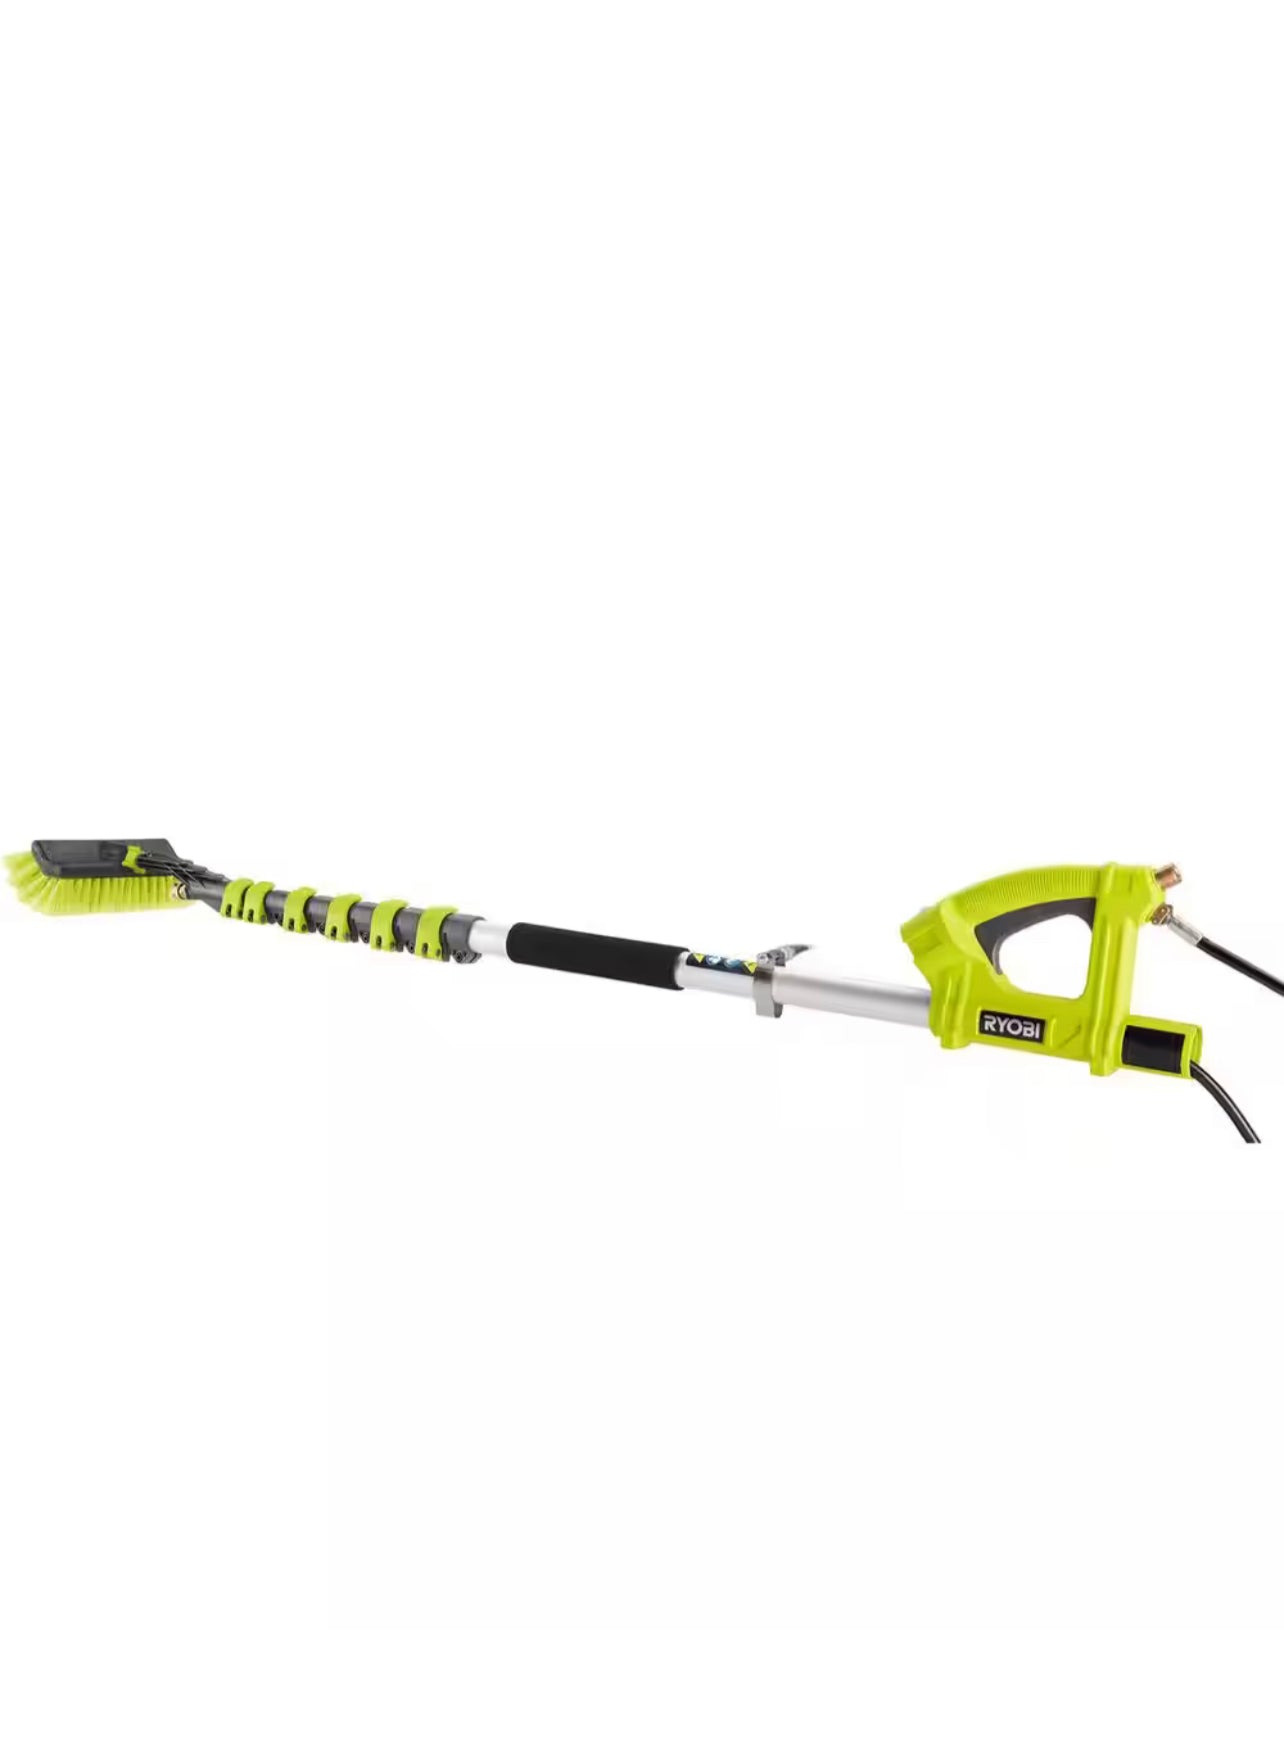 Ryobi 18ft Extension Pole with Brush for Pressure Washer Damaged Box